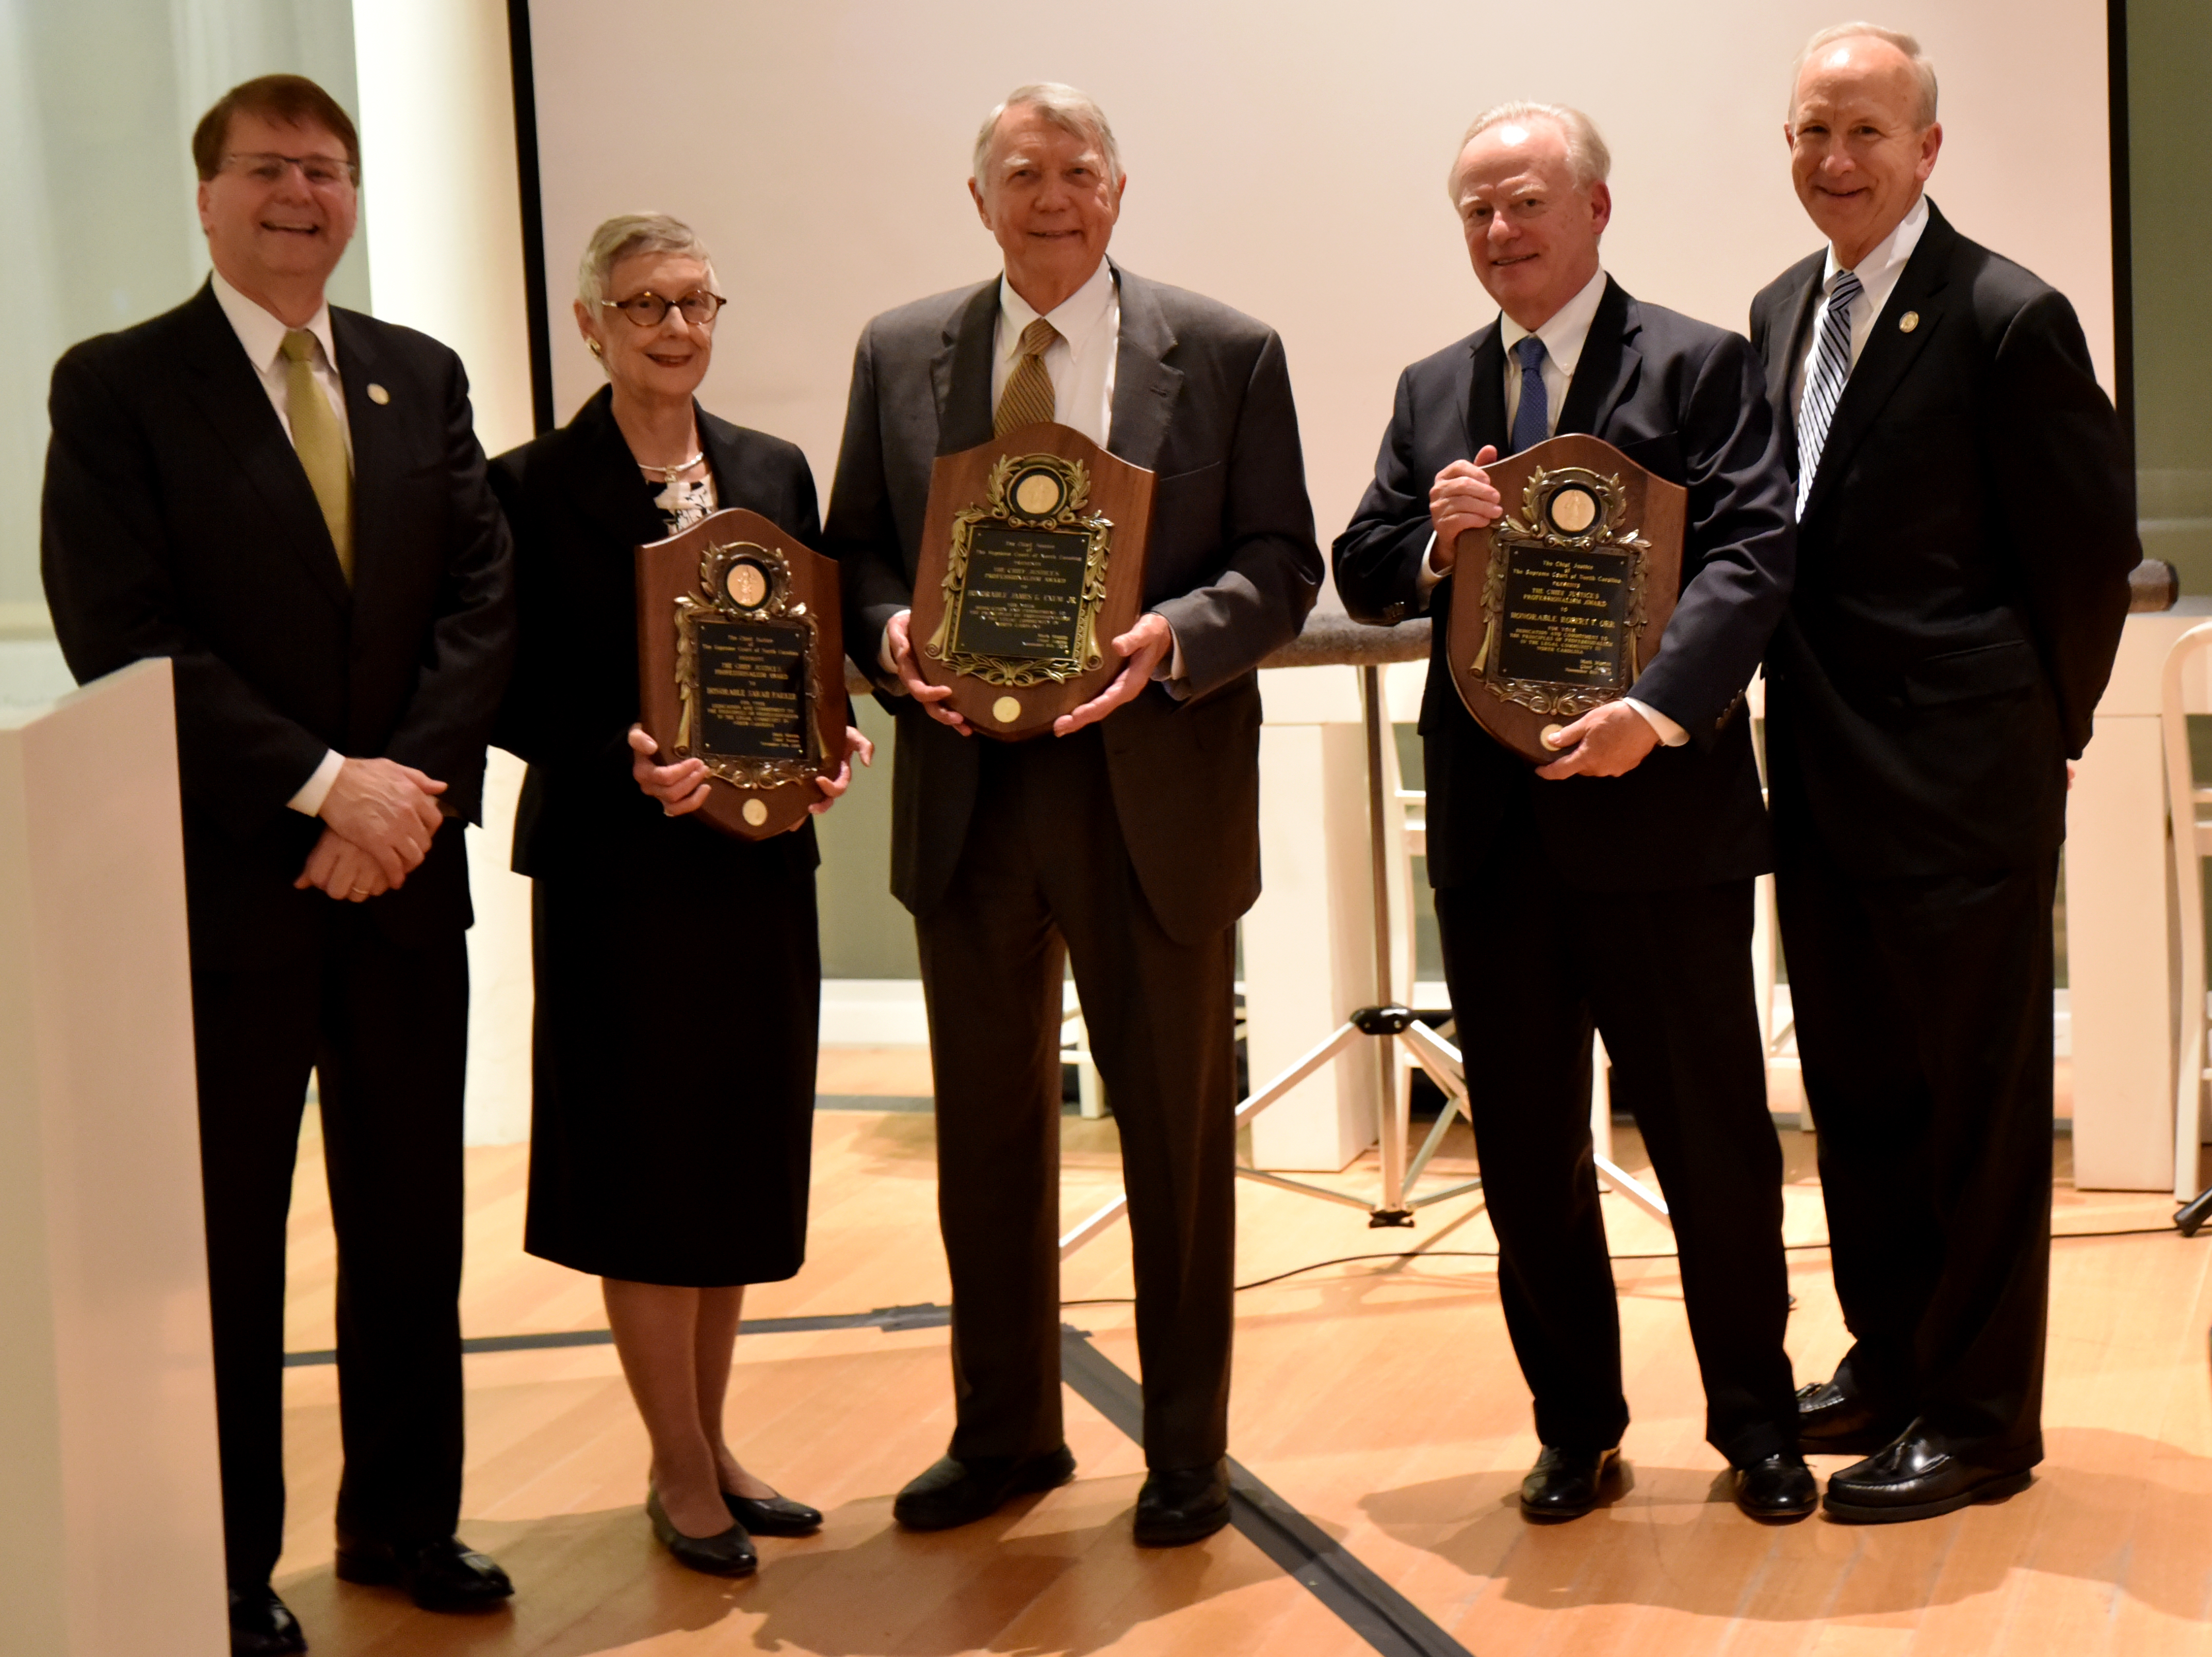 From left to right, Chief Justice Mark Martin, former Chief Justice Sarah Paraker, former Chief Justice James G. Exum, Jr.,  fromer Associate Justice Robert F. Orr, and Senior Associate Justice Paul Newby